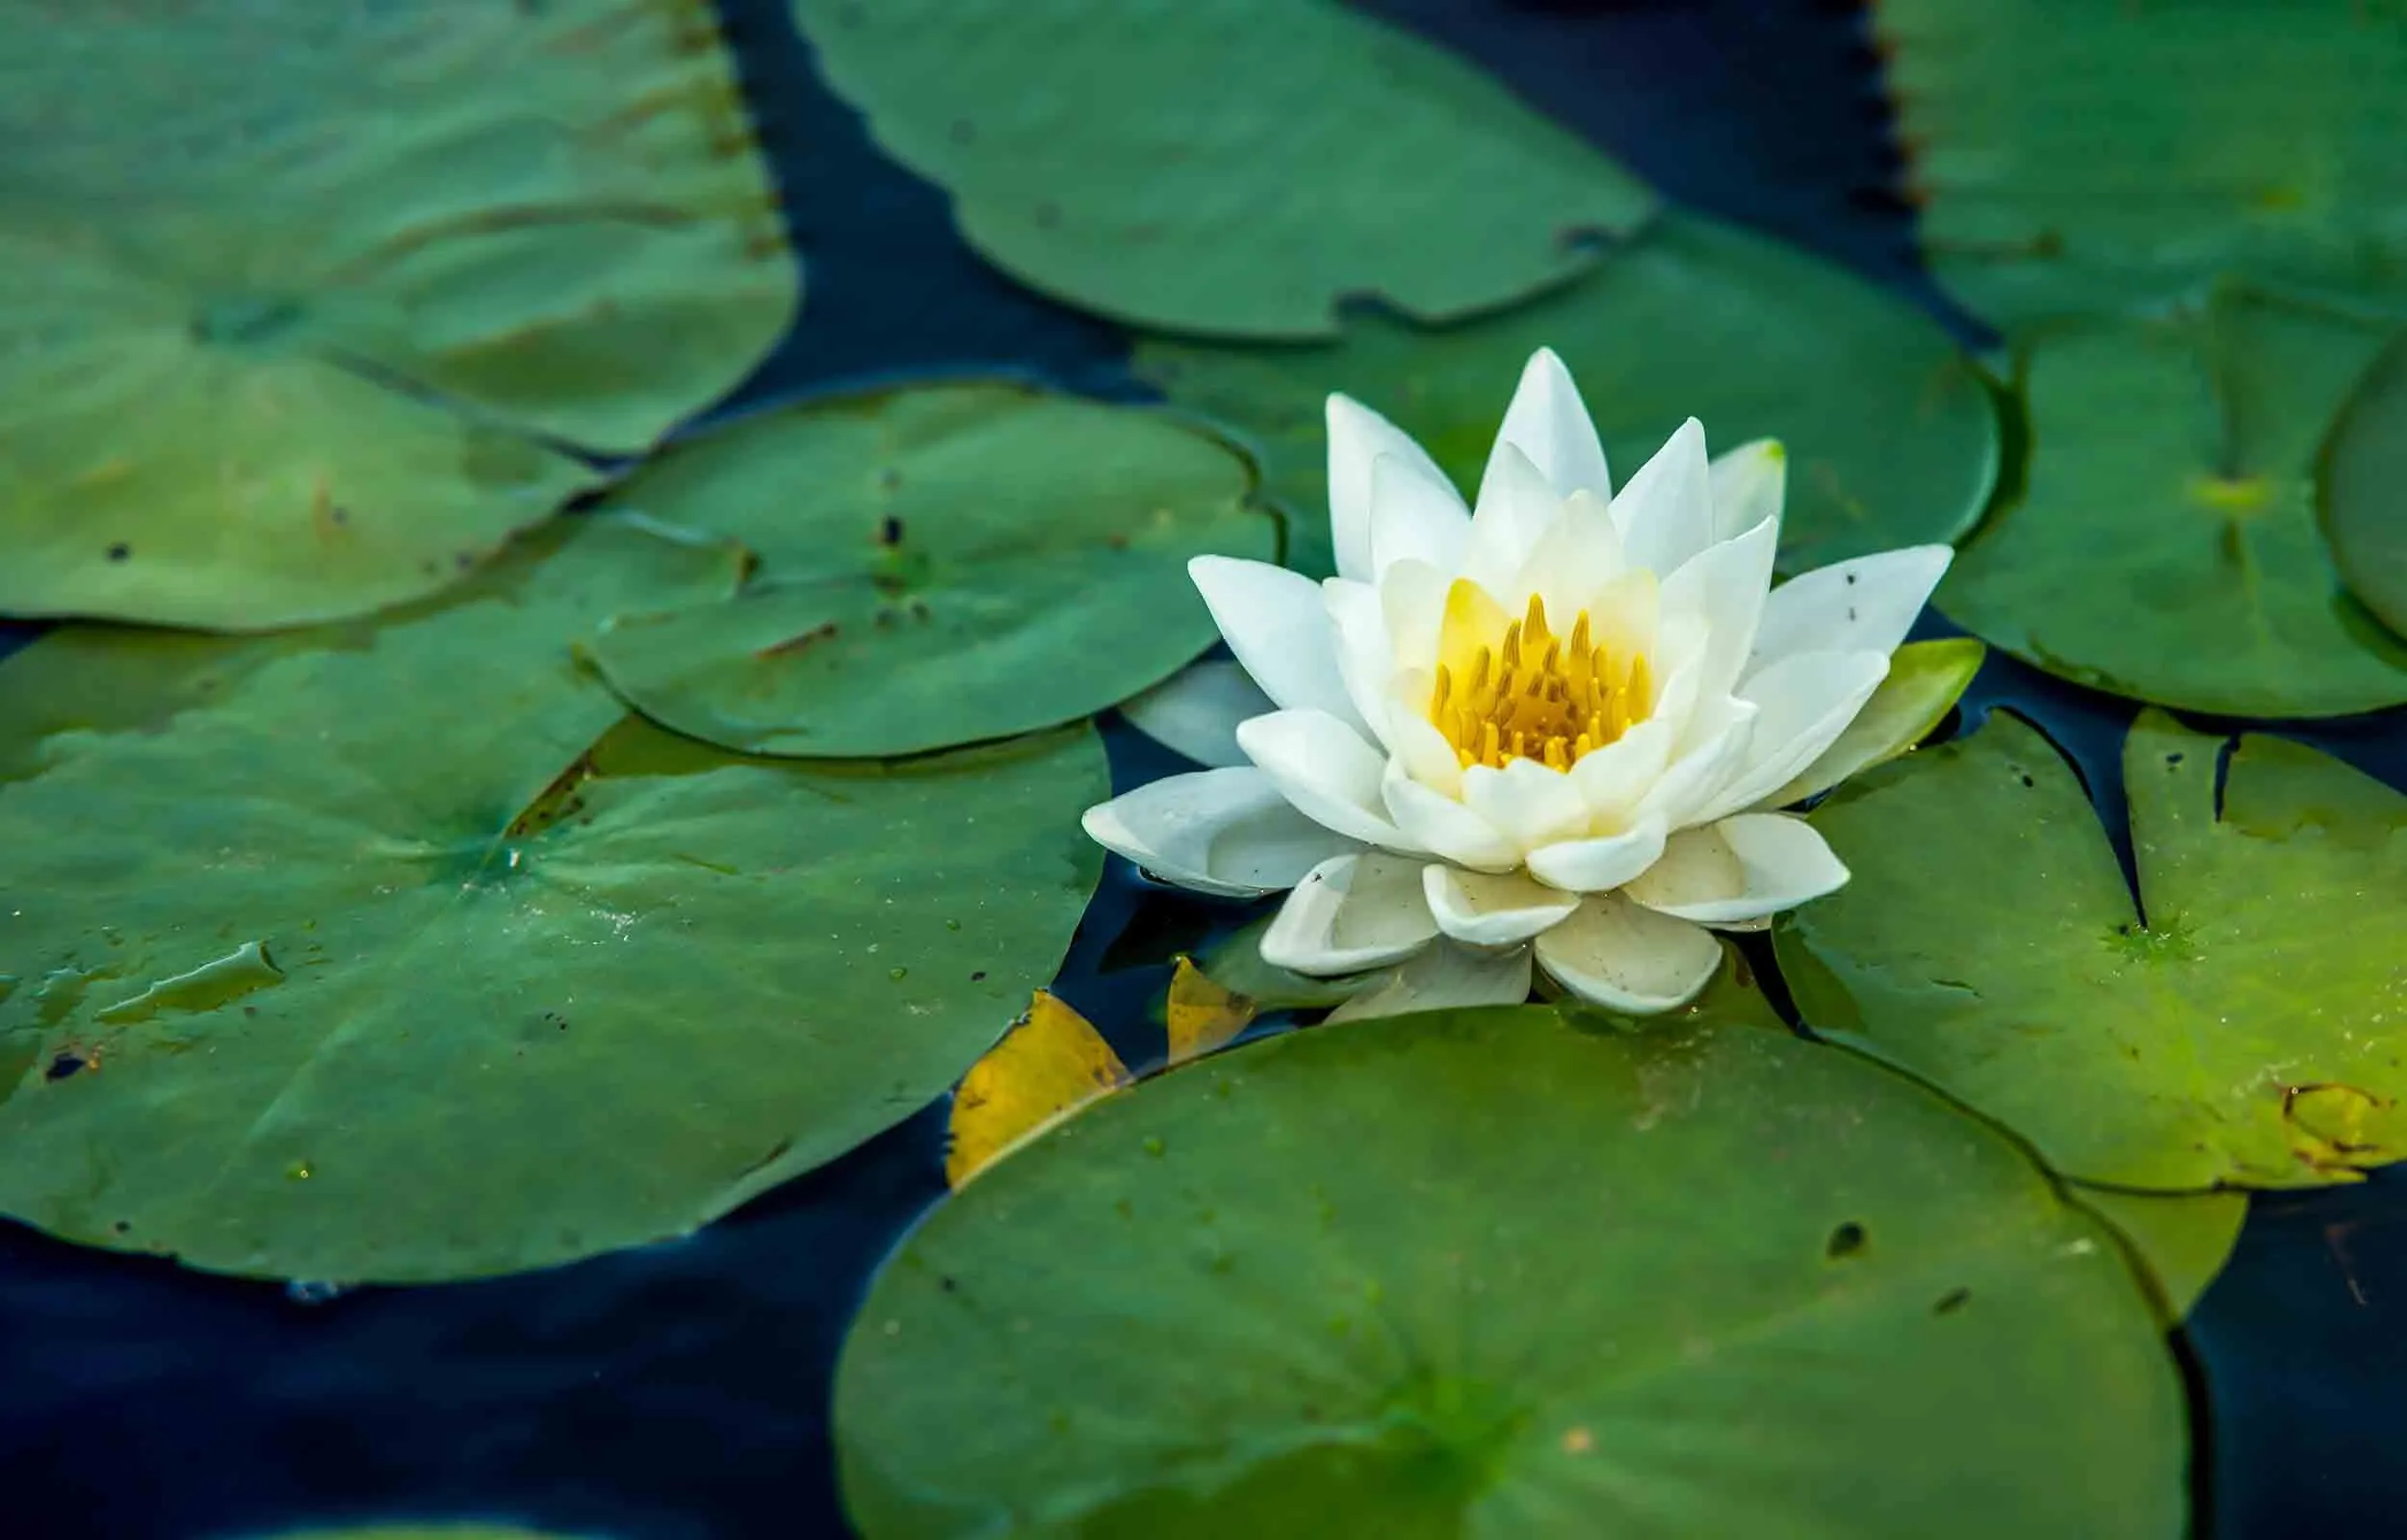 A flowering White Water Lily between lily pads in a pond.